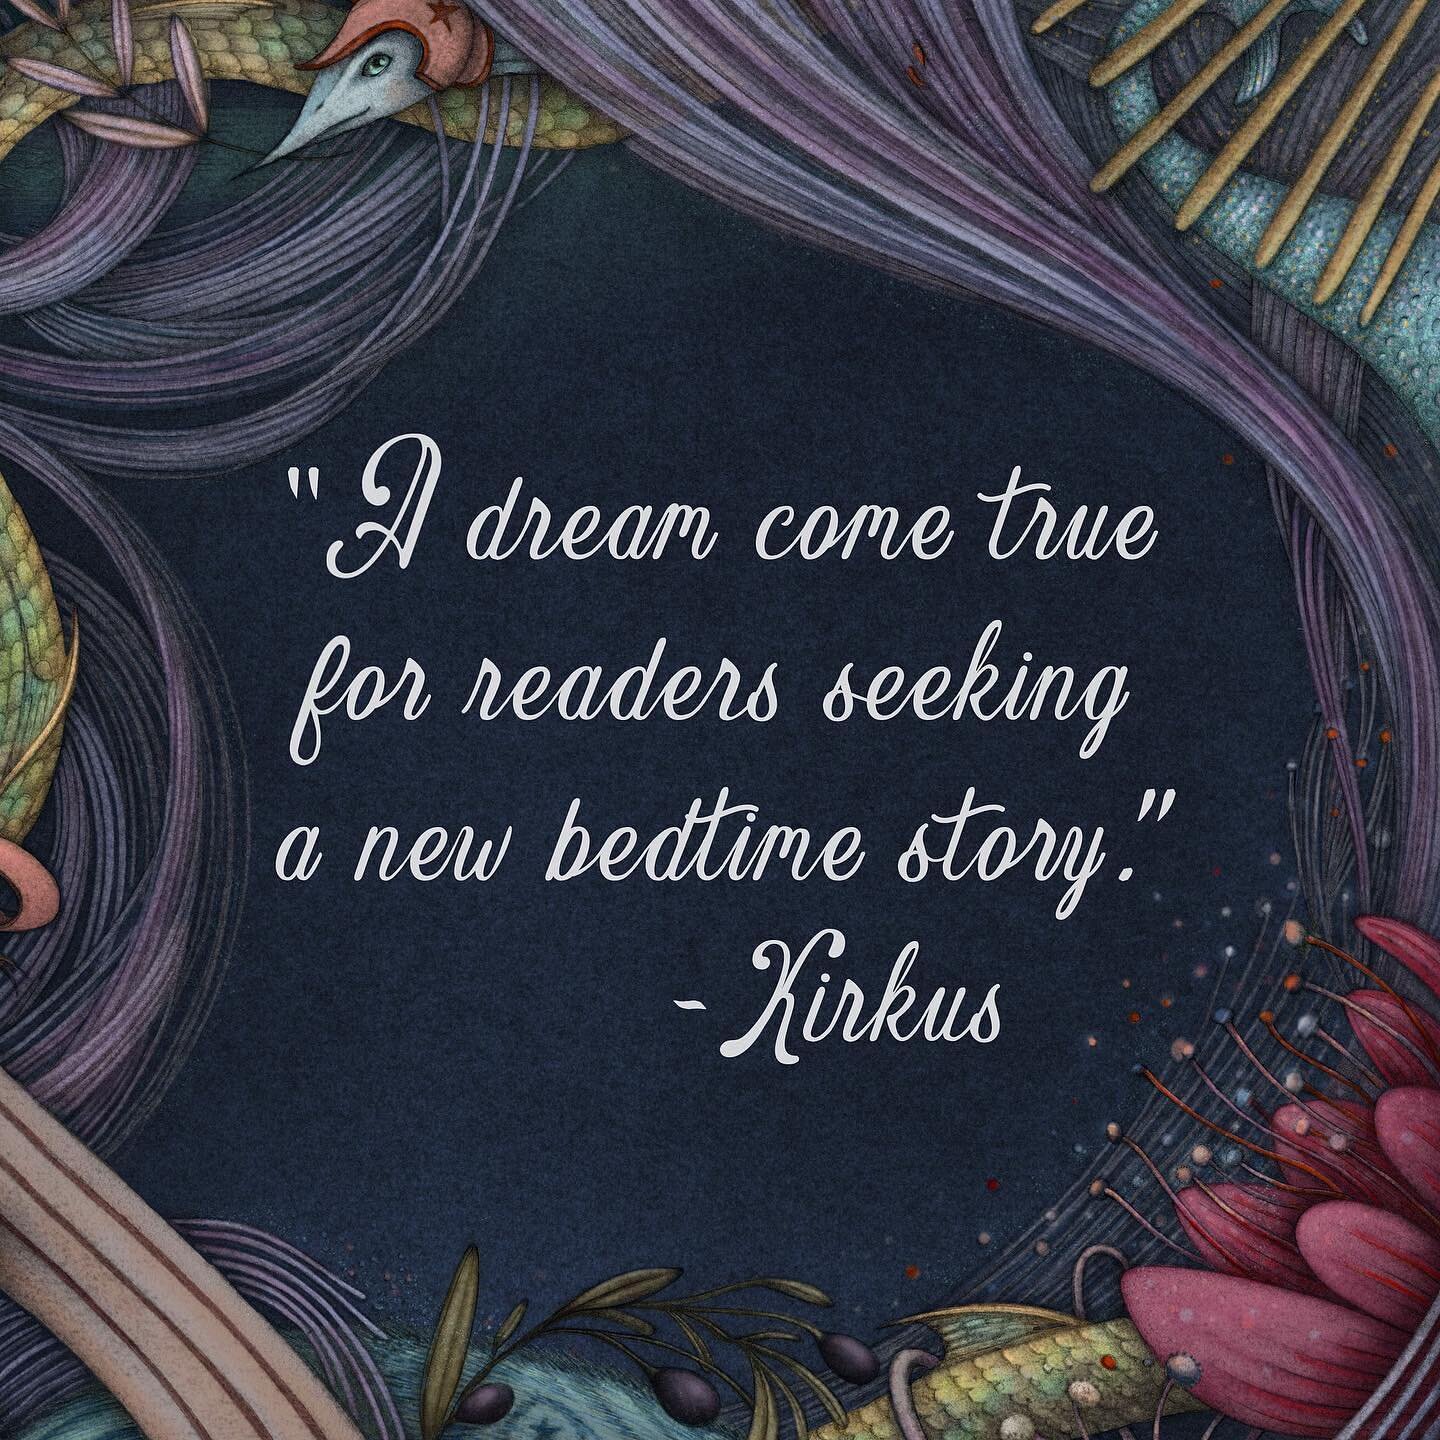 The first trade review for The Night Frolic by Julie Berry and illustrated by me is in! Kirkus calls it &ldquo;A dream come true for readers seeking a new bedtime story.&rdquo;

We can&rsquo;t wait to share the book on February 28. In the mean time, 